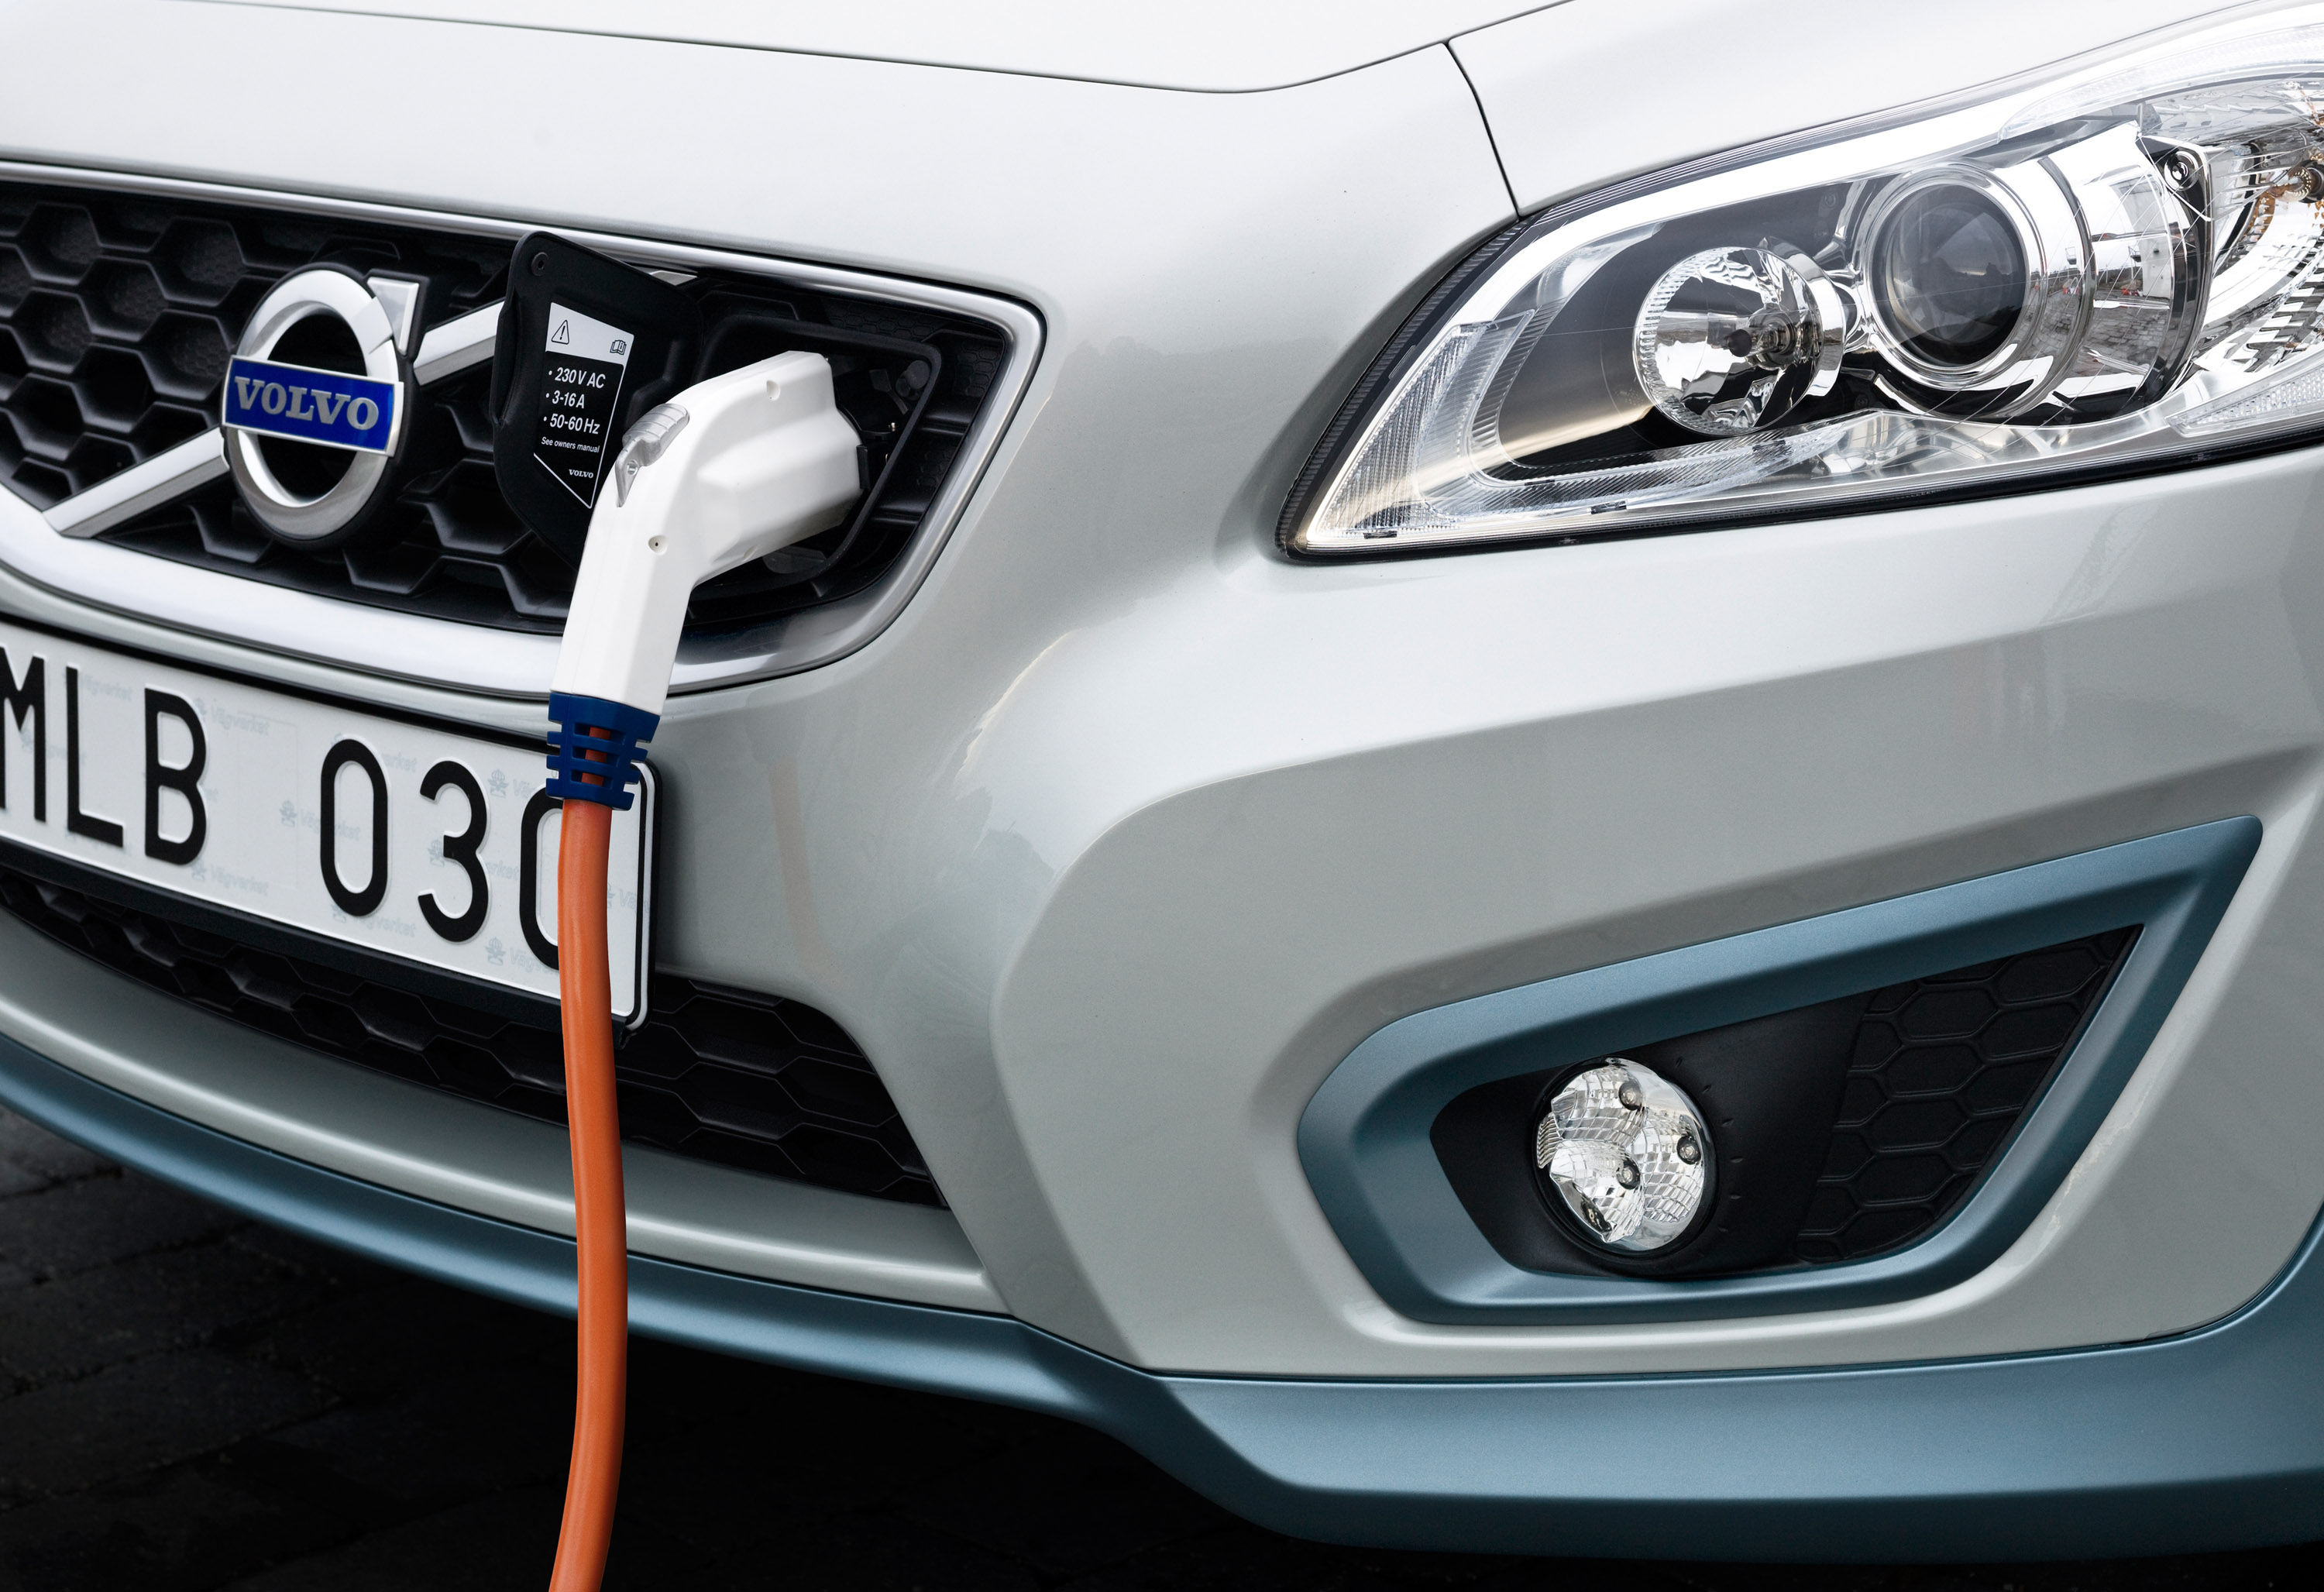 Volvo C30 Battery Electric Vehicle